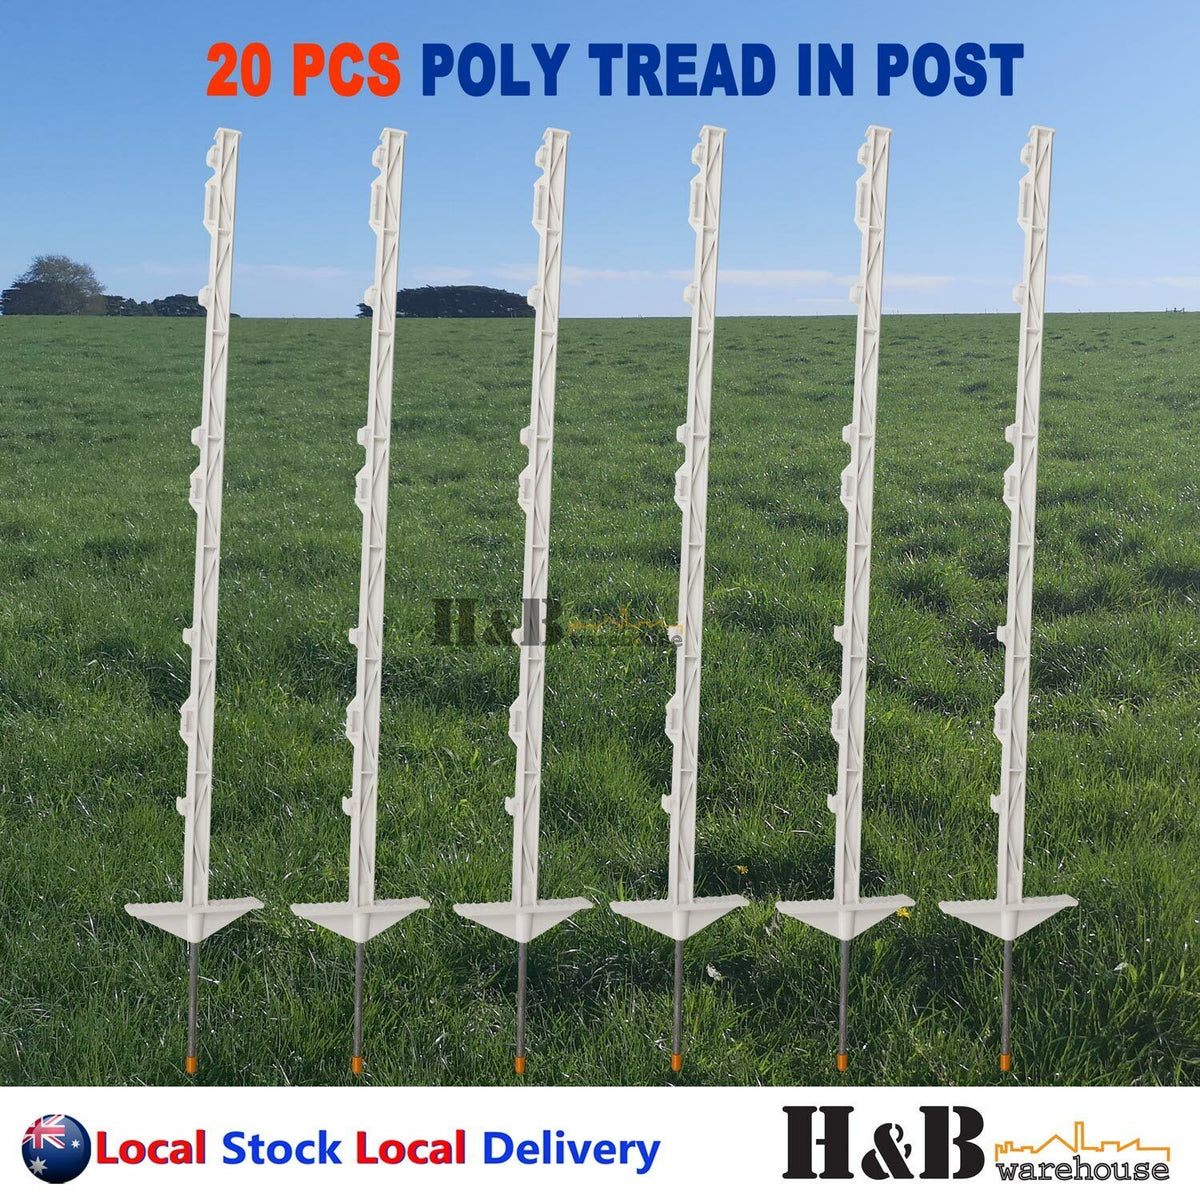 20X MULTI WIRE STRIP GRAZE POLY TREAD IN POSTS TAPE ELECTRIC FENCE POST FENCING